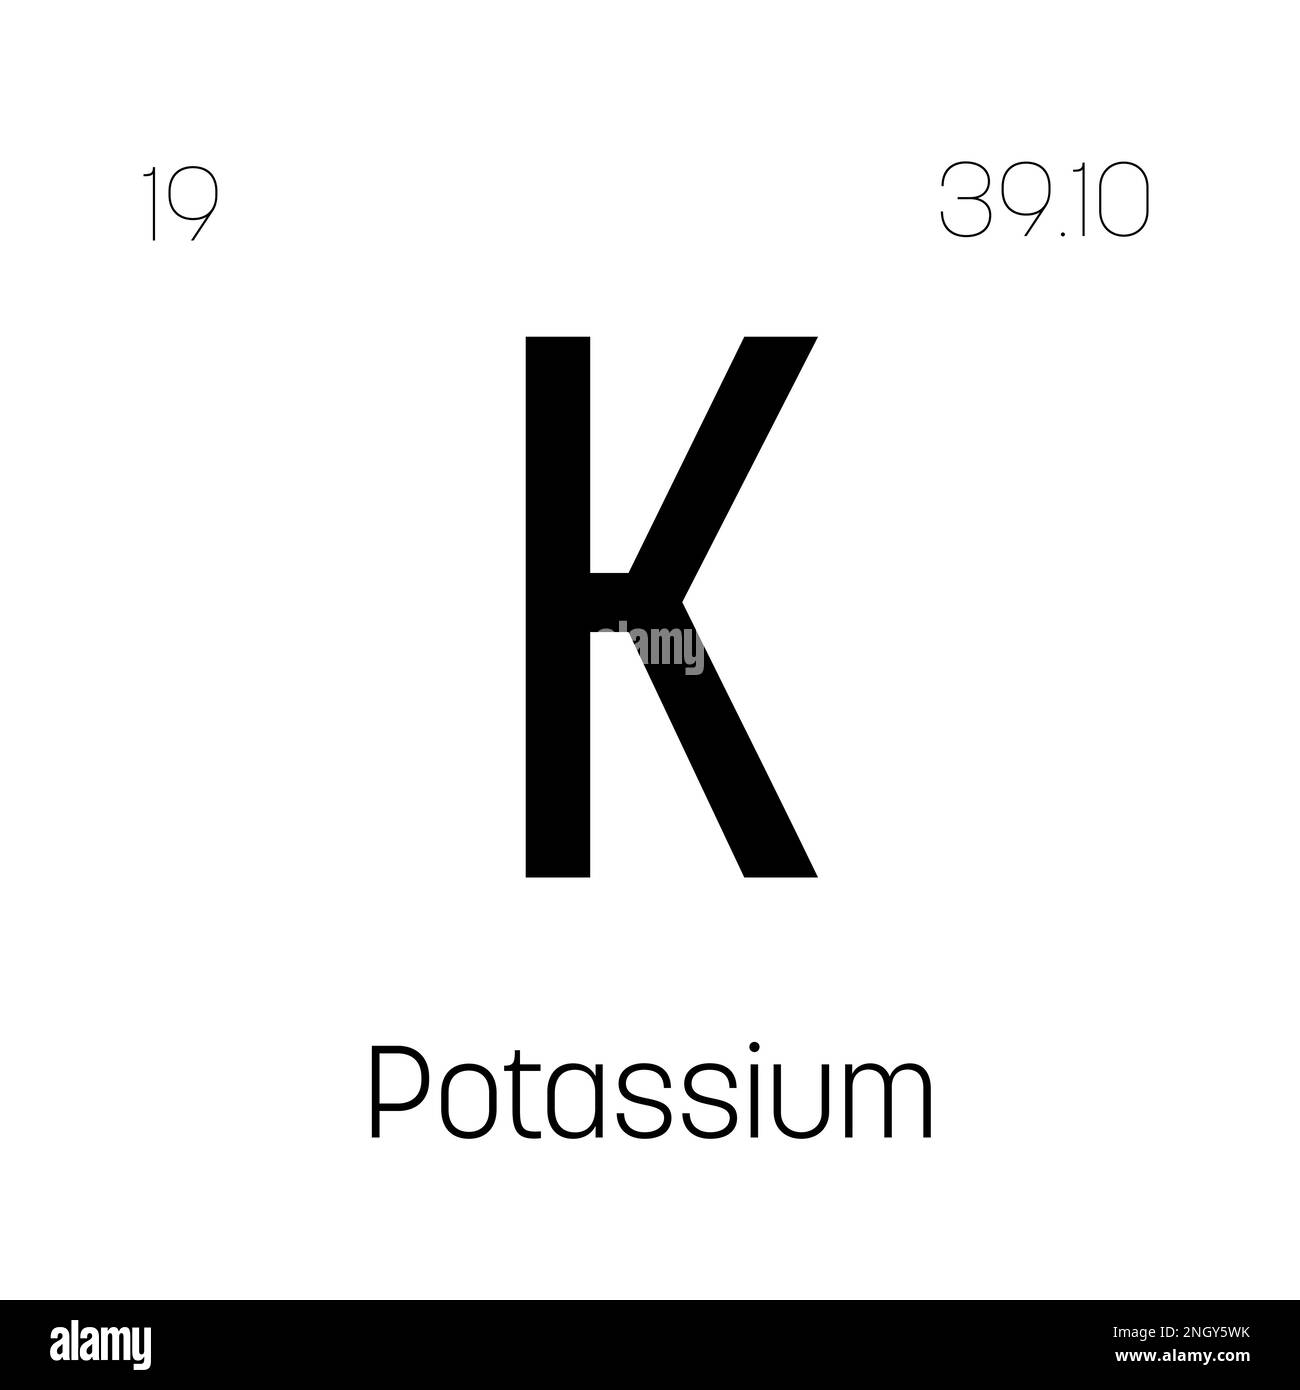 Potassium, K, periodic table element with name, symbol, atomic number and weight. Alkali metal with various industrial uses, such as in fertilizer, soap, and as a medication for certain medical conditions. Stock Vector